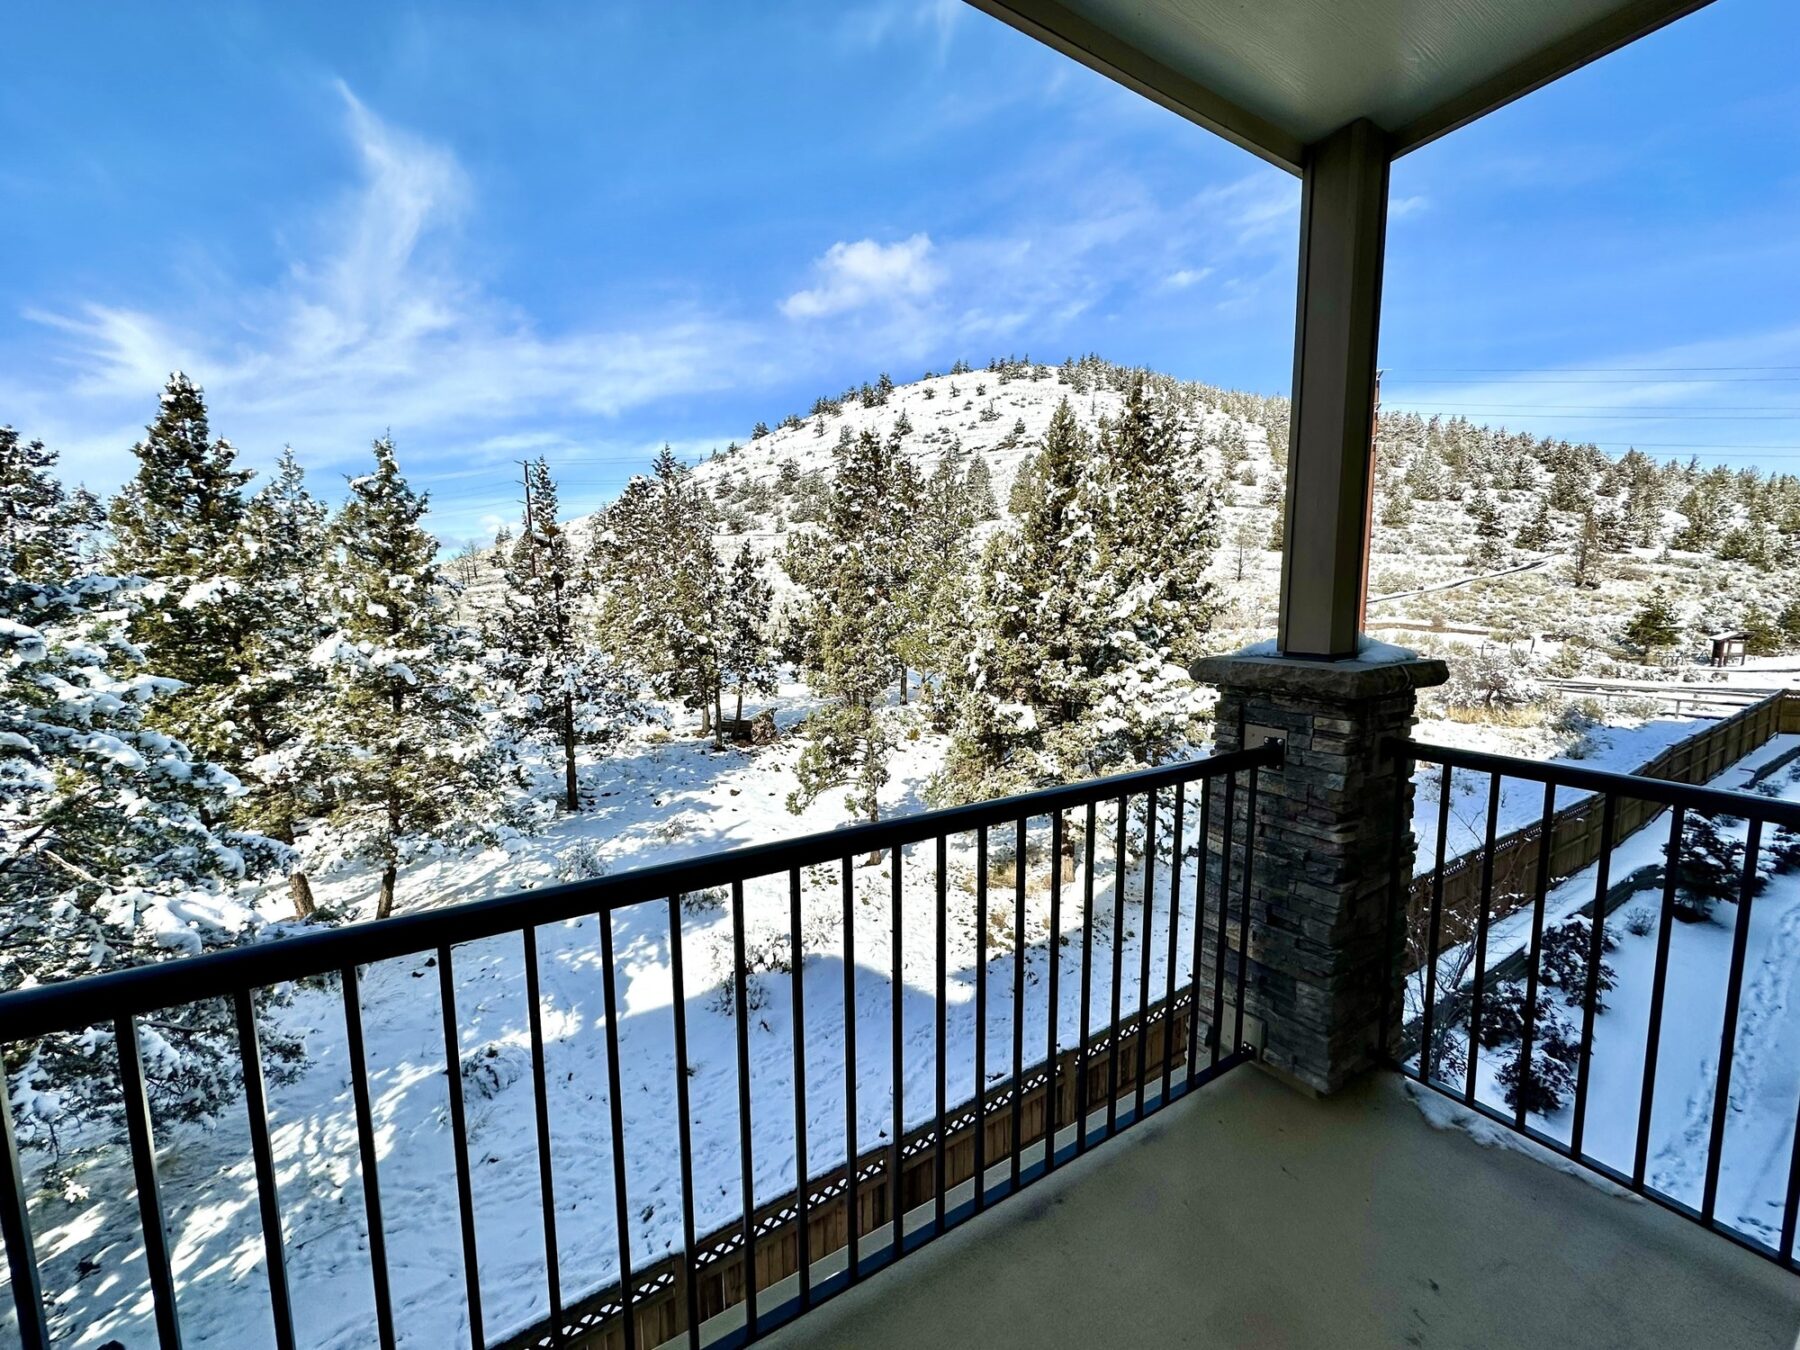 balcony view overlooking the surrounding snowy forest landscape